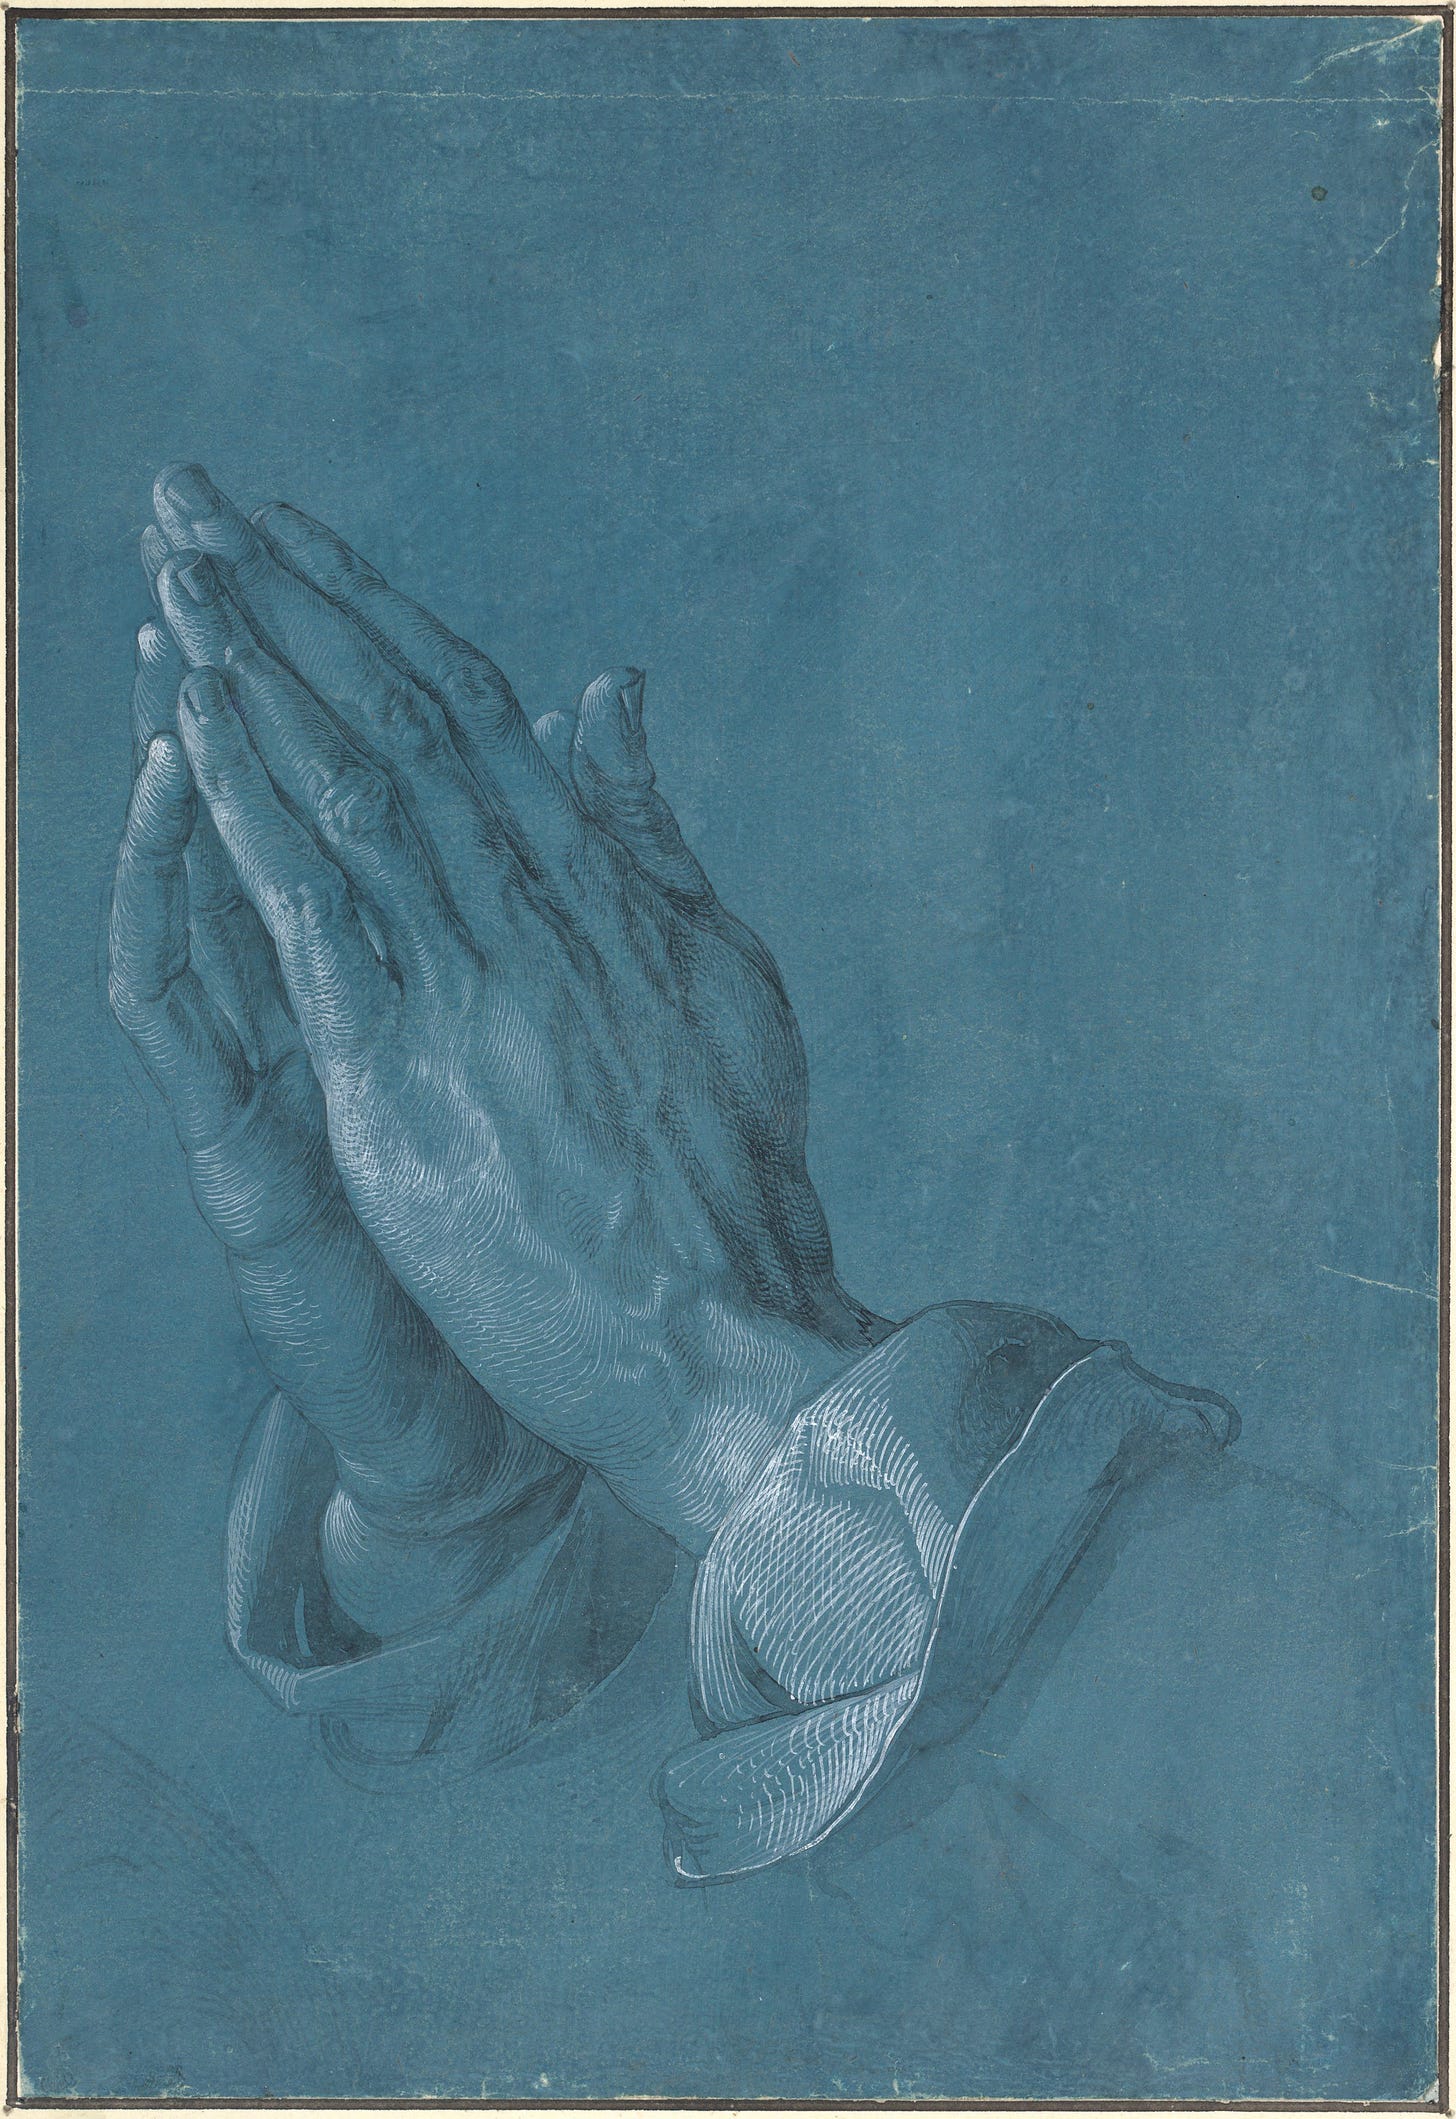 hands in prayer painting by Durer